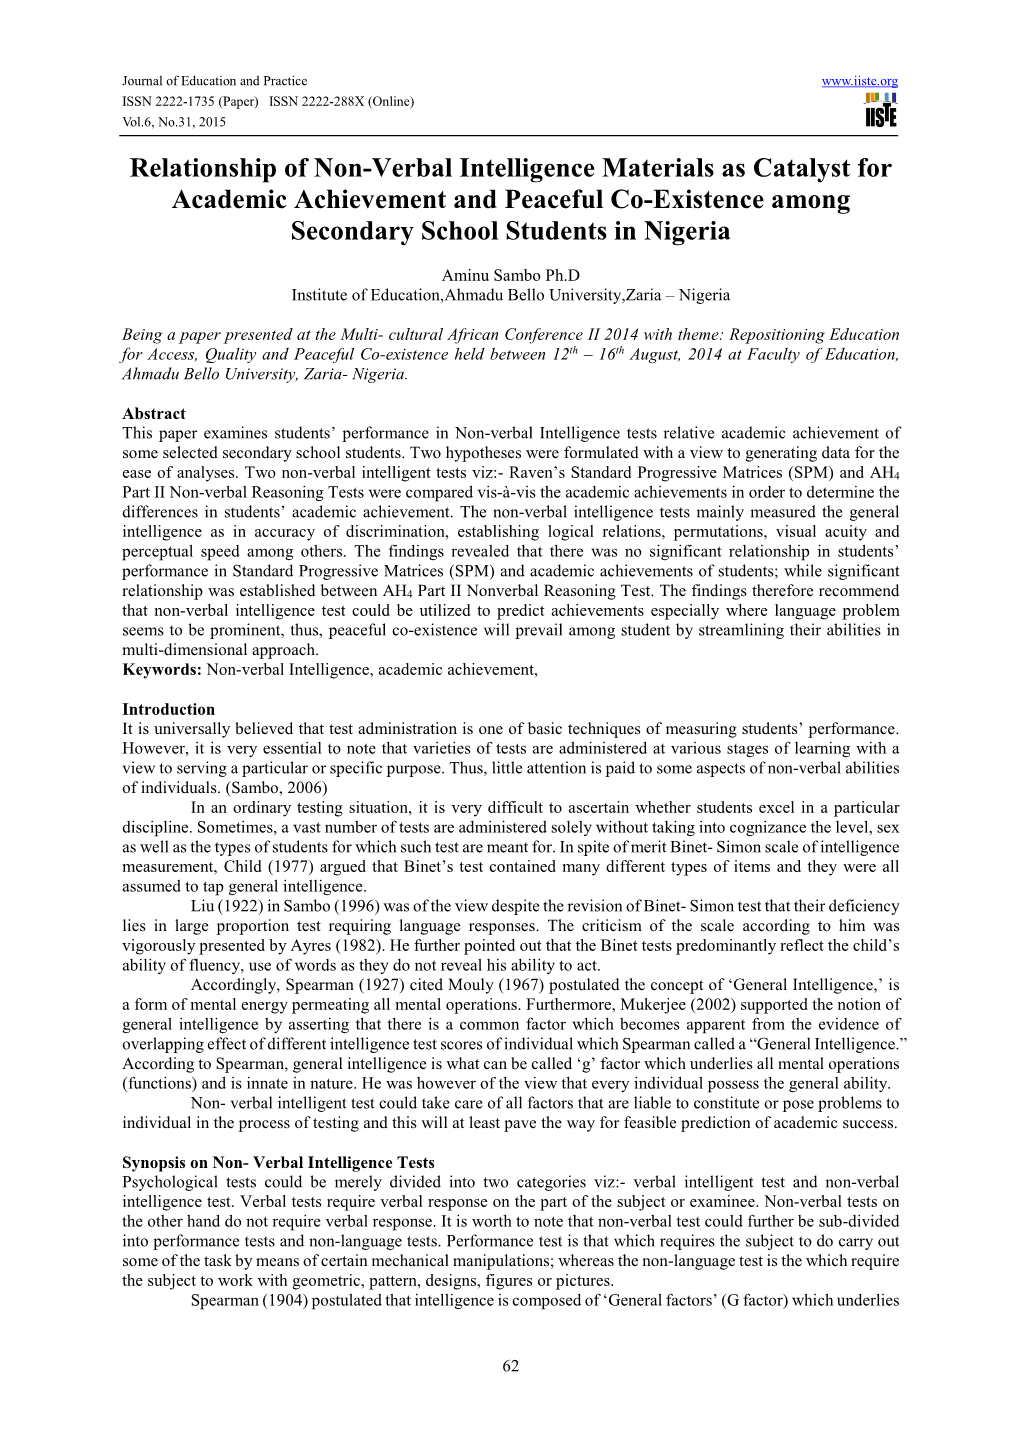 Relationship of Non-Verbal Intelligence Materials As Catalyst for Academic Achievement and Peaceful Co-Existence Among Secondary School Students in Nigeria